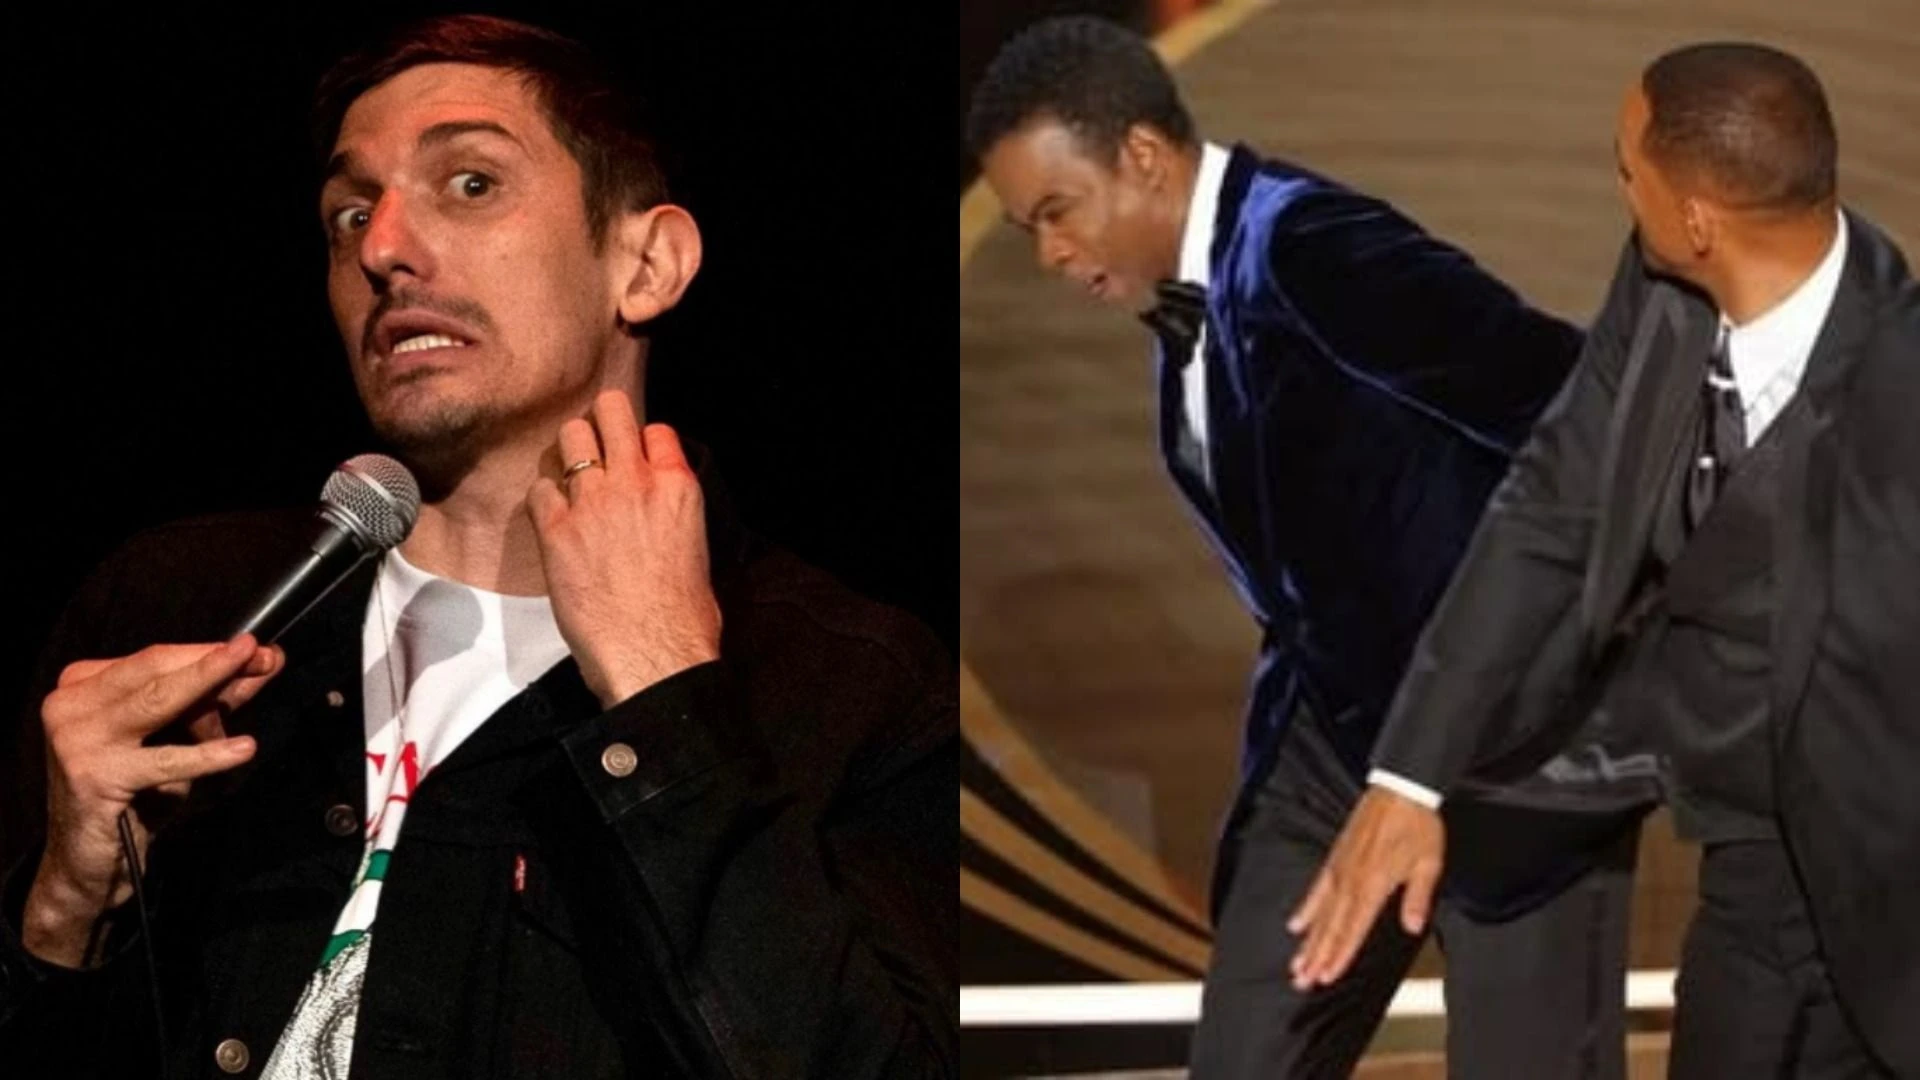 Andy Schulz roasted Will Smith after the Chris Rock slap incident